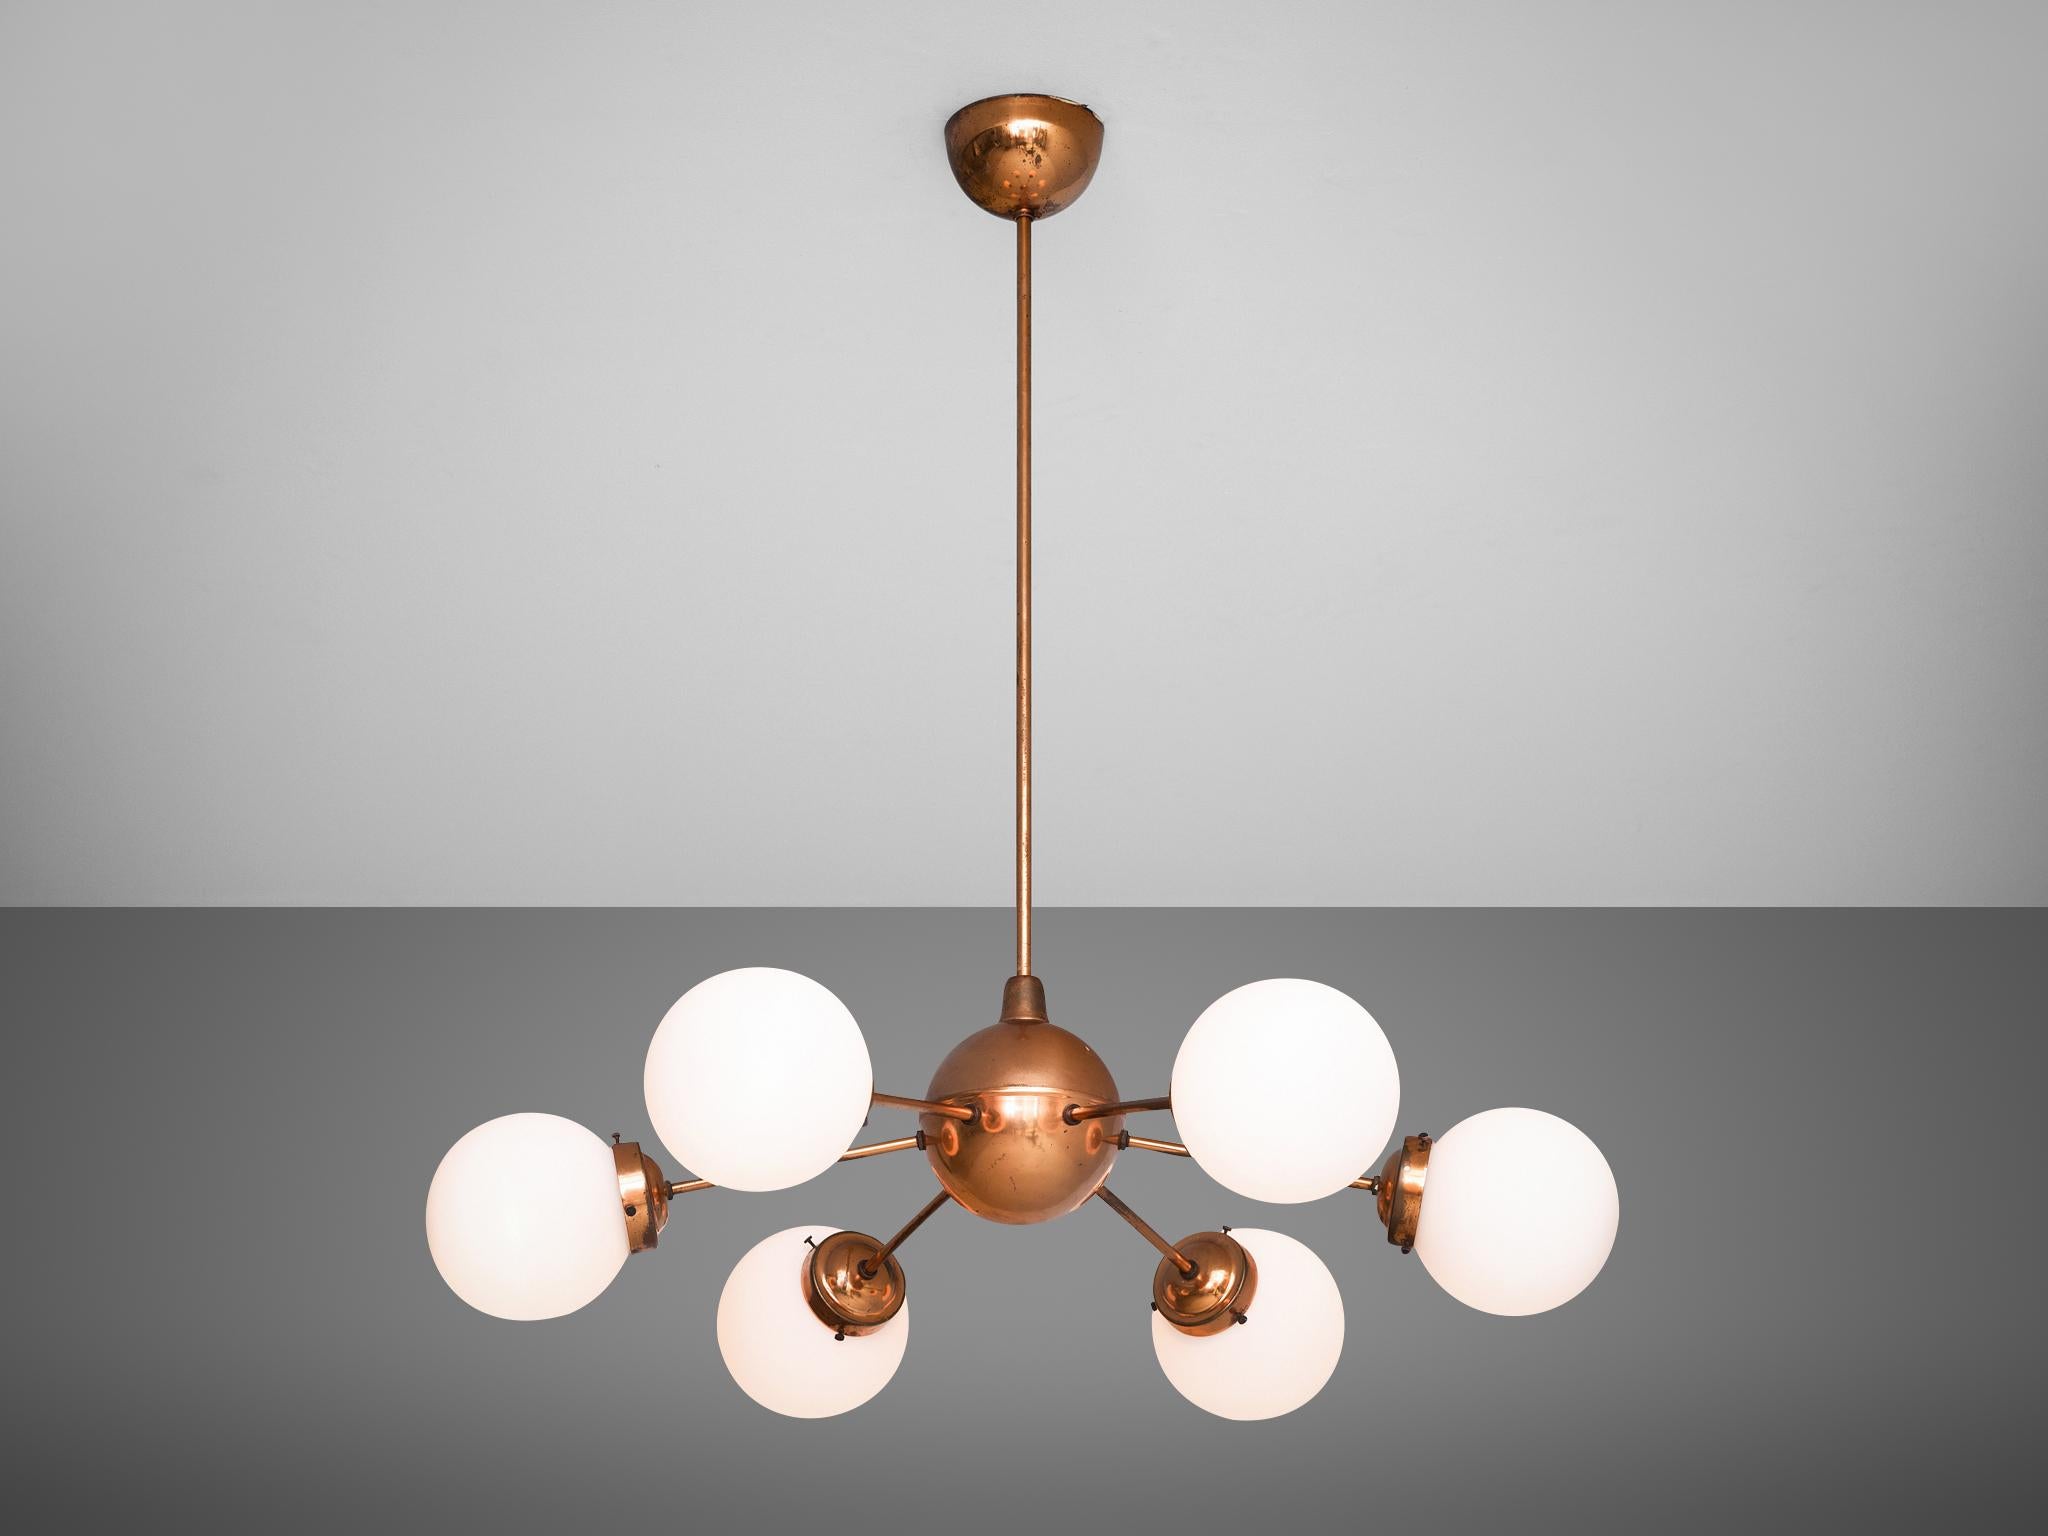 Sputnik chandelier, opal glass, copper, Europe, 1970s

Sputnik chandelier in copper and opaline glass. This chandelier consist of a copper globe with six arms, each with a light point and glass sphere. The stern and canopy are executed in matching